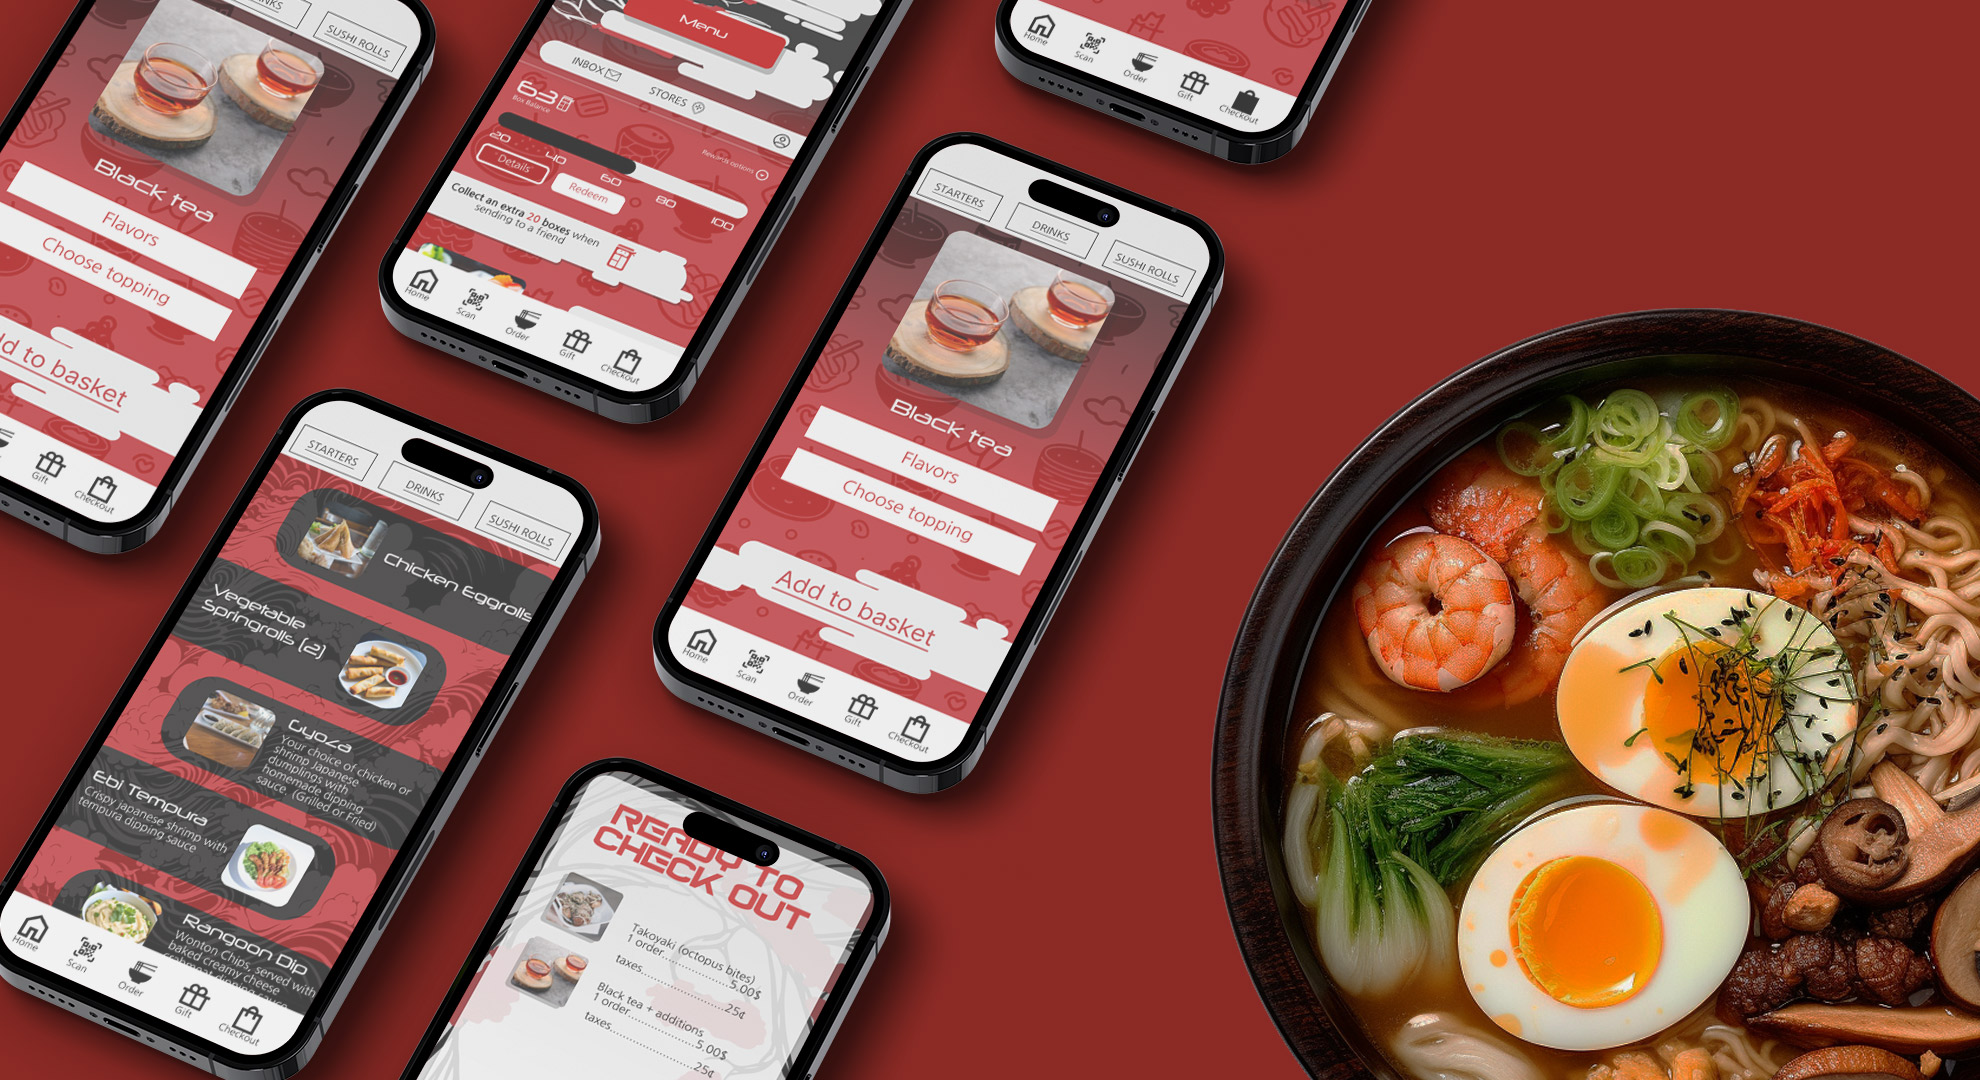 Teriyaki box app / Teriyaki box app: 1920 x 1080 pixel, app design, 2023 an app design for a Japanese restaurant called teriyaki box, a way for people to place orders to go without having to wait in line.